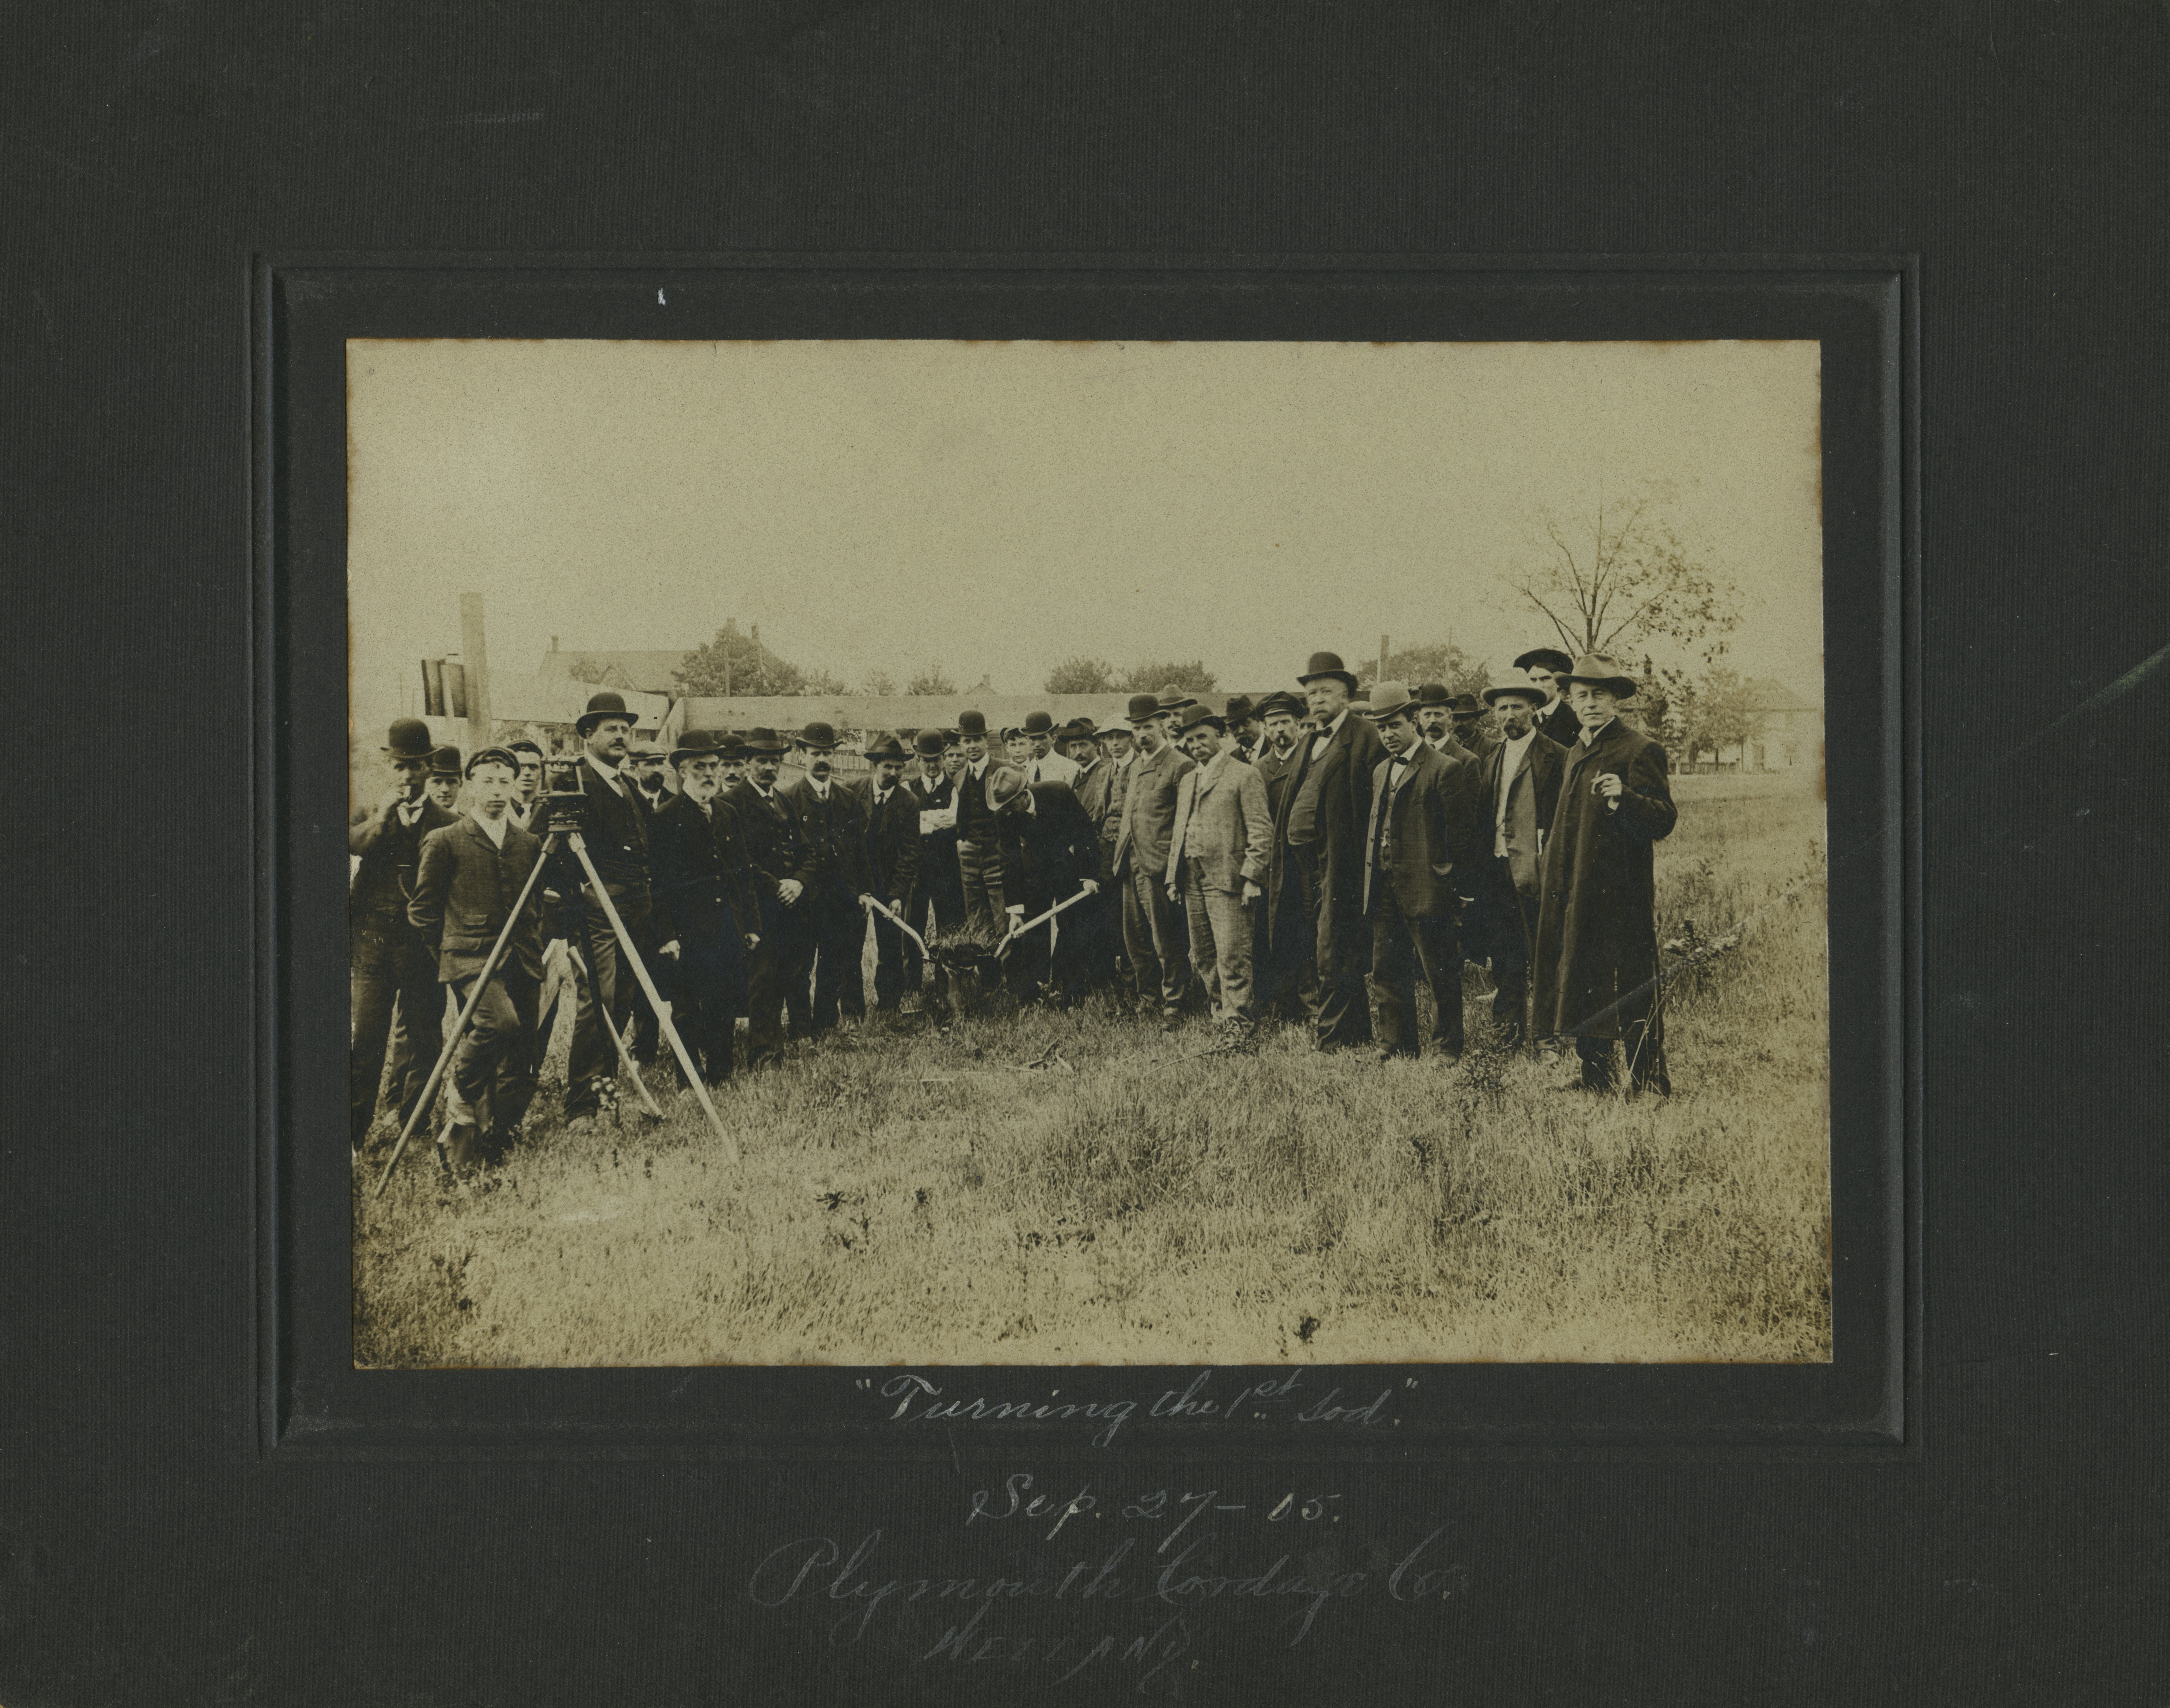 A very old photograph of a crowd of men posing for a photo outdoors.